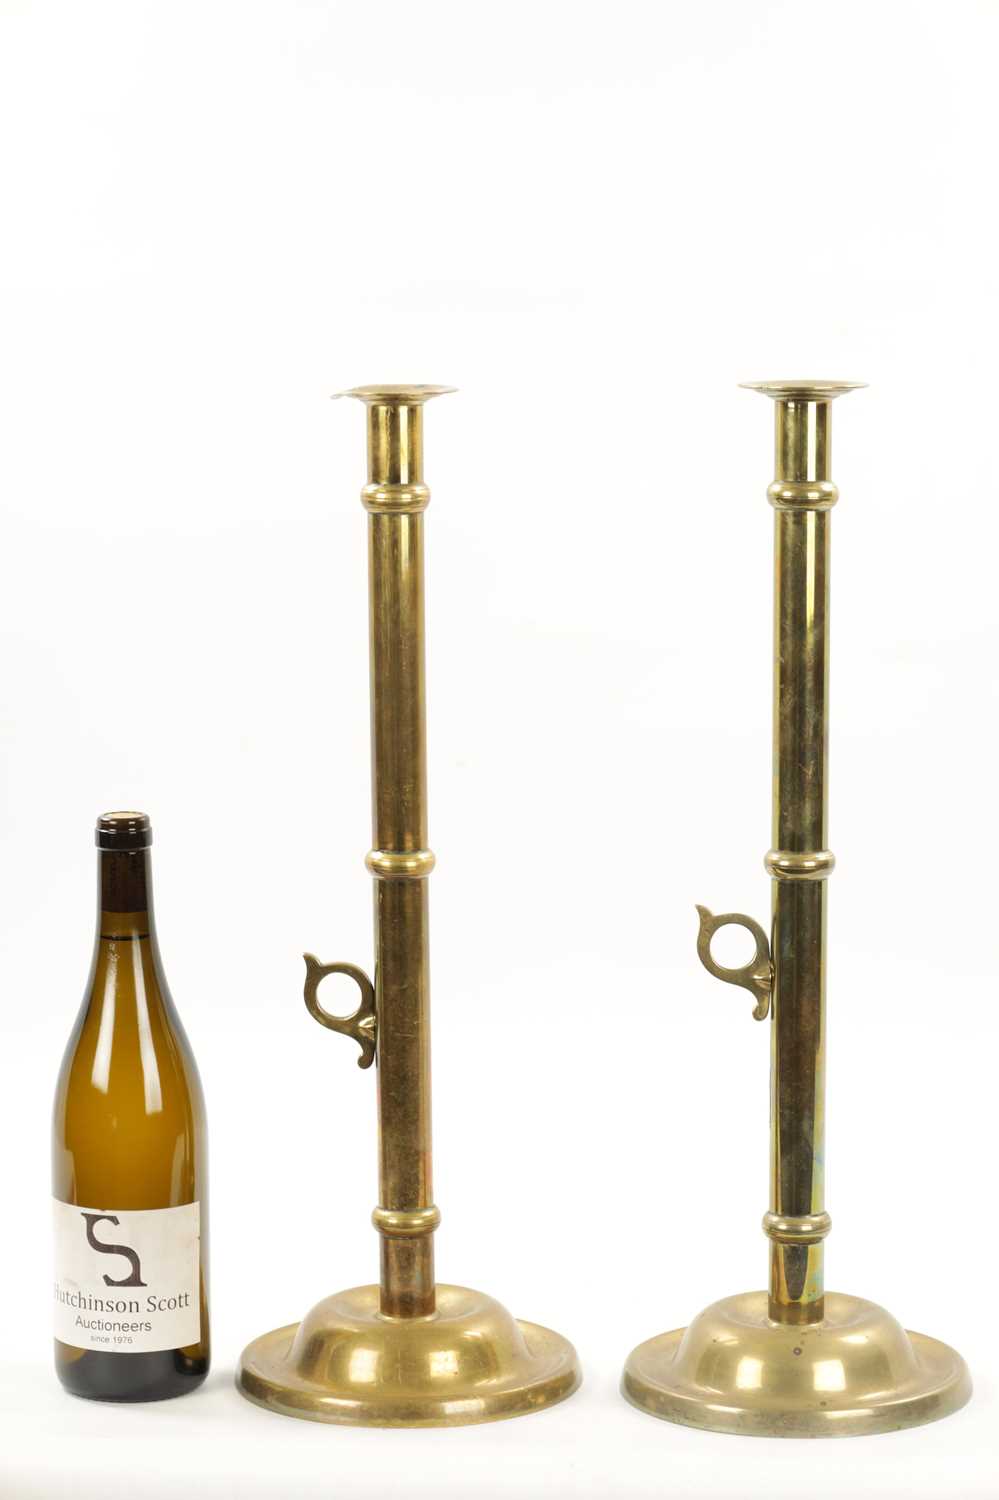 A PAIR OF LARGE 19TH CENTURY BRASS EJECTOR 'PULPIT' BRASS CANDLESTICKS - Image 5 of 7